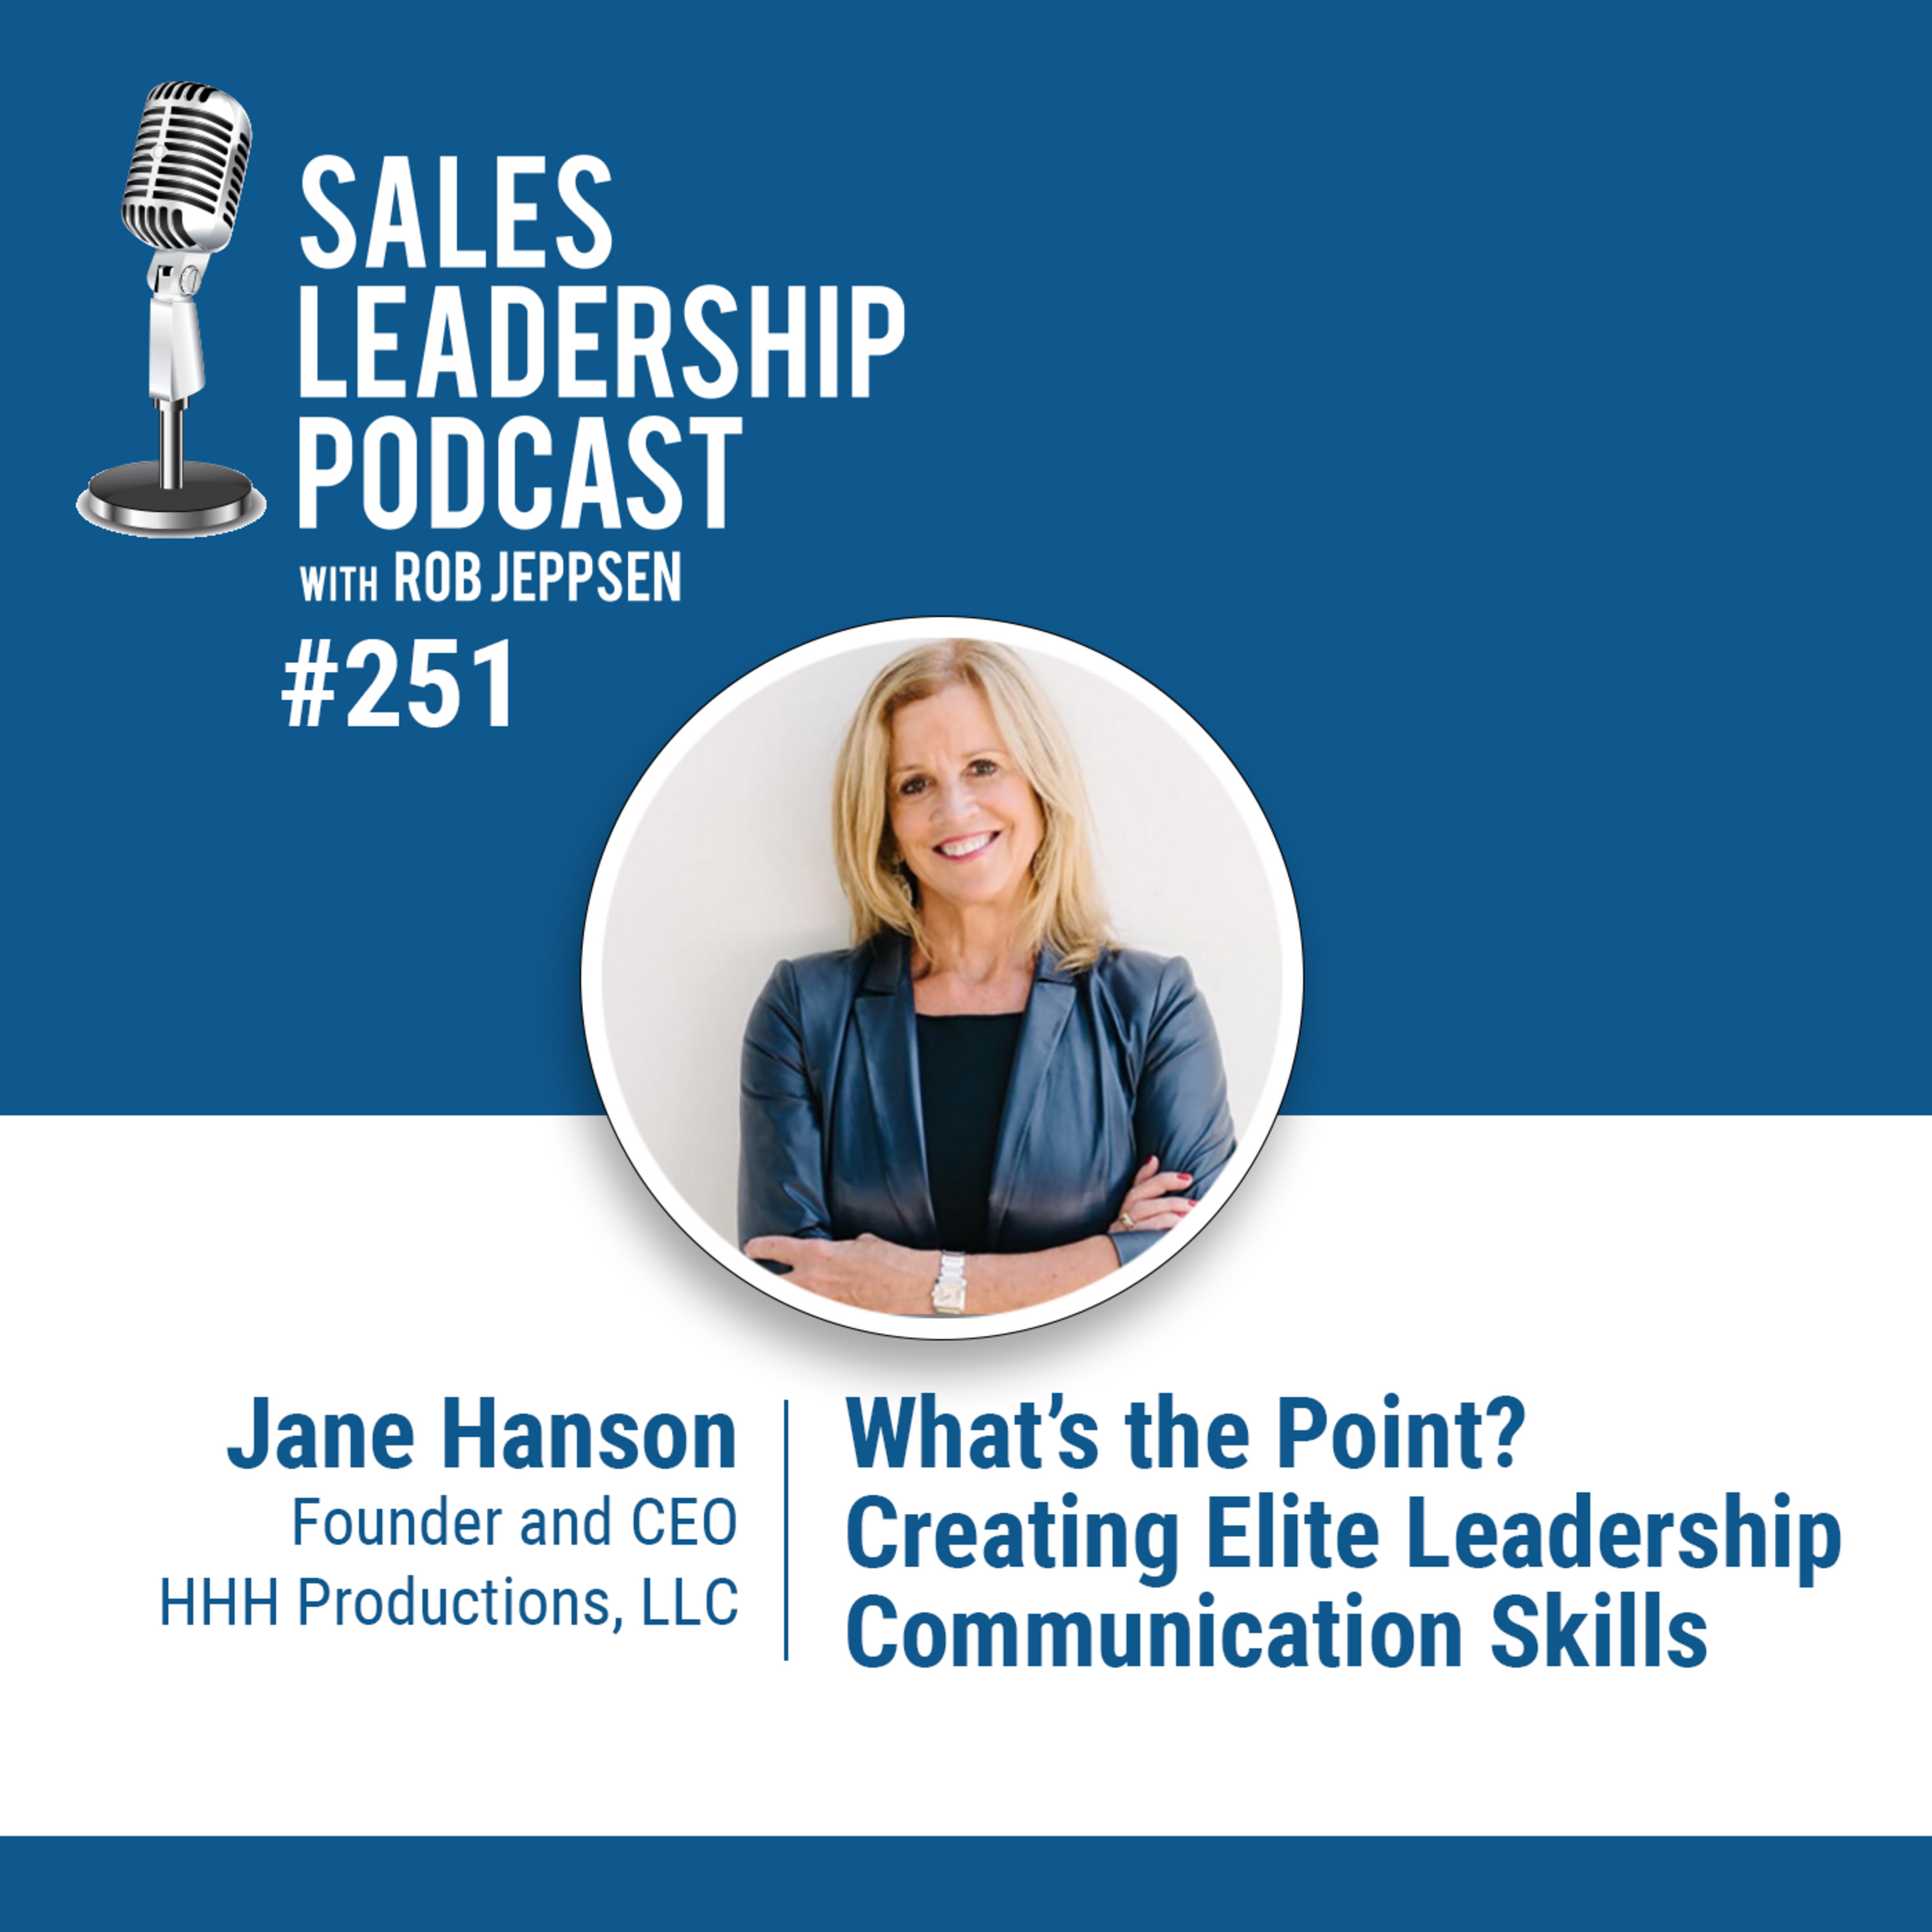 Episode 251: Jane Hanson, Founder and CEO of HHH Productions: What’s the Point? Creating Elite Leadership Communication Skills